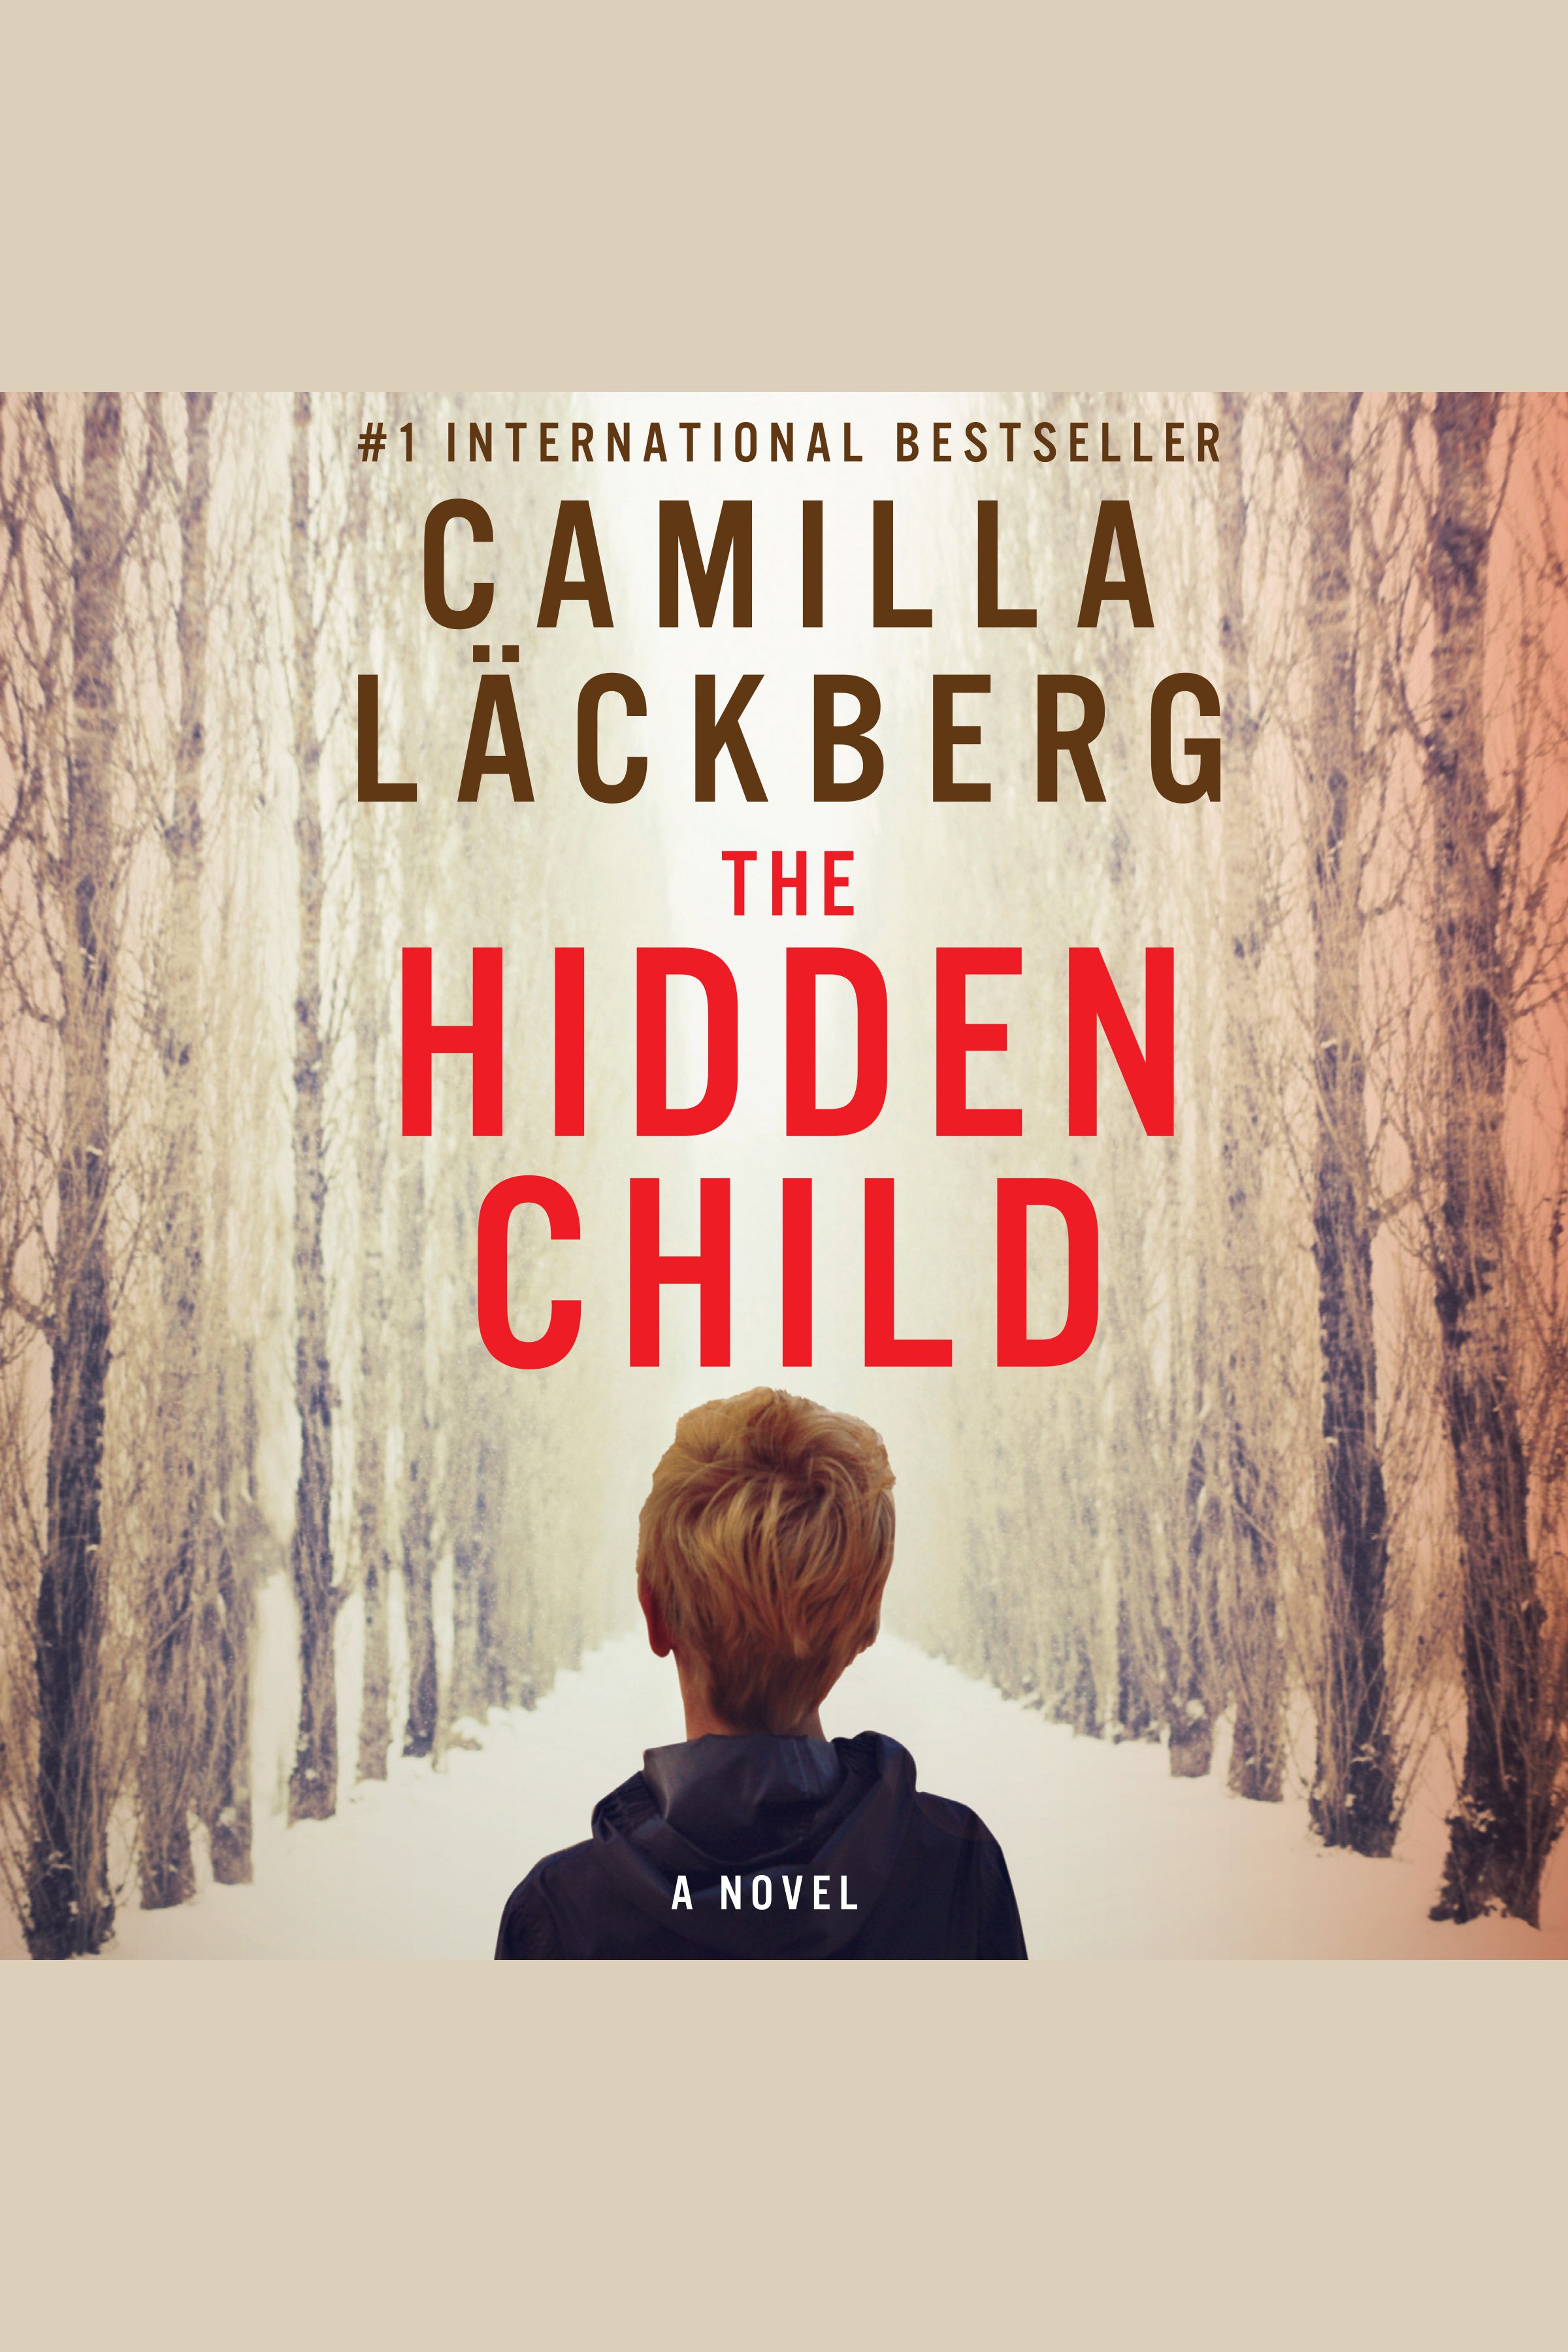 The hidden child cover image